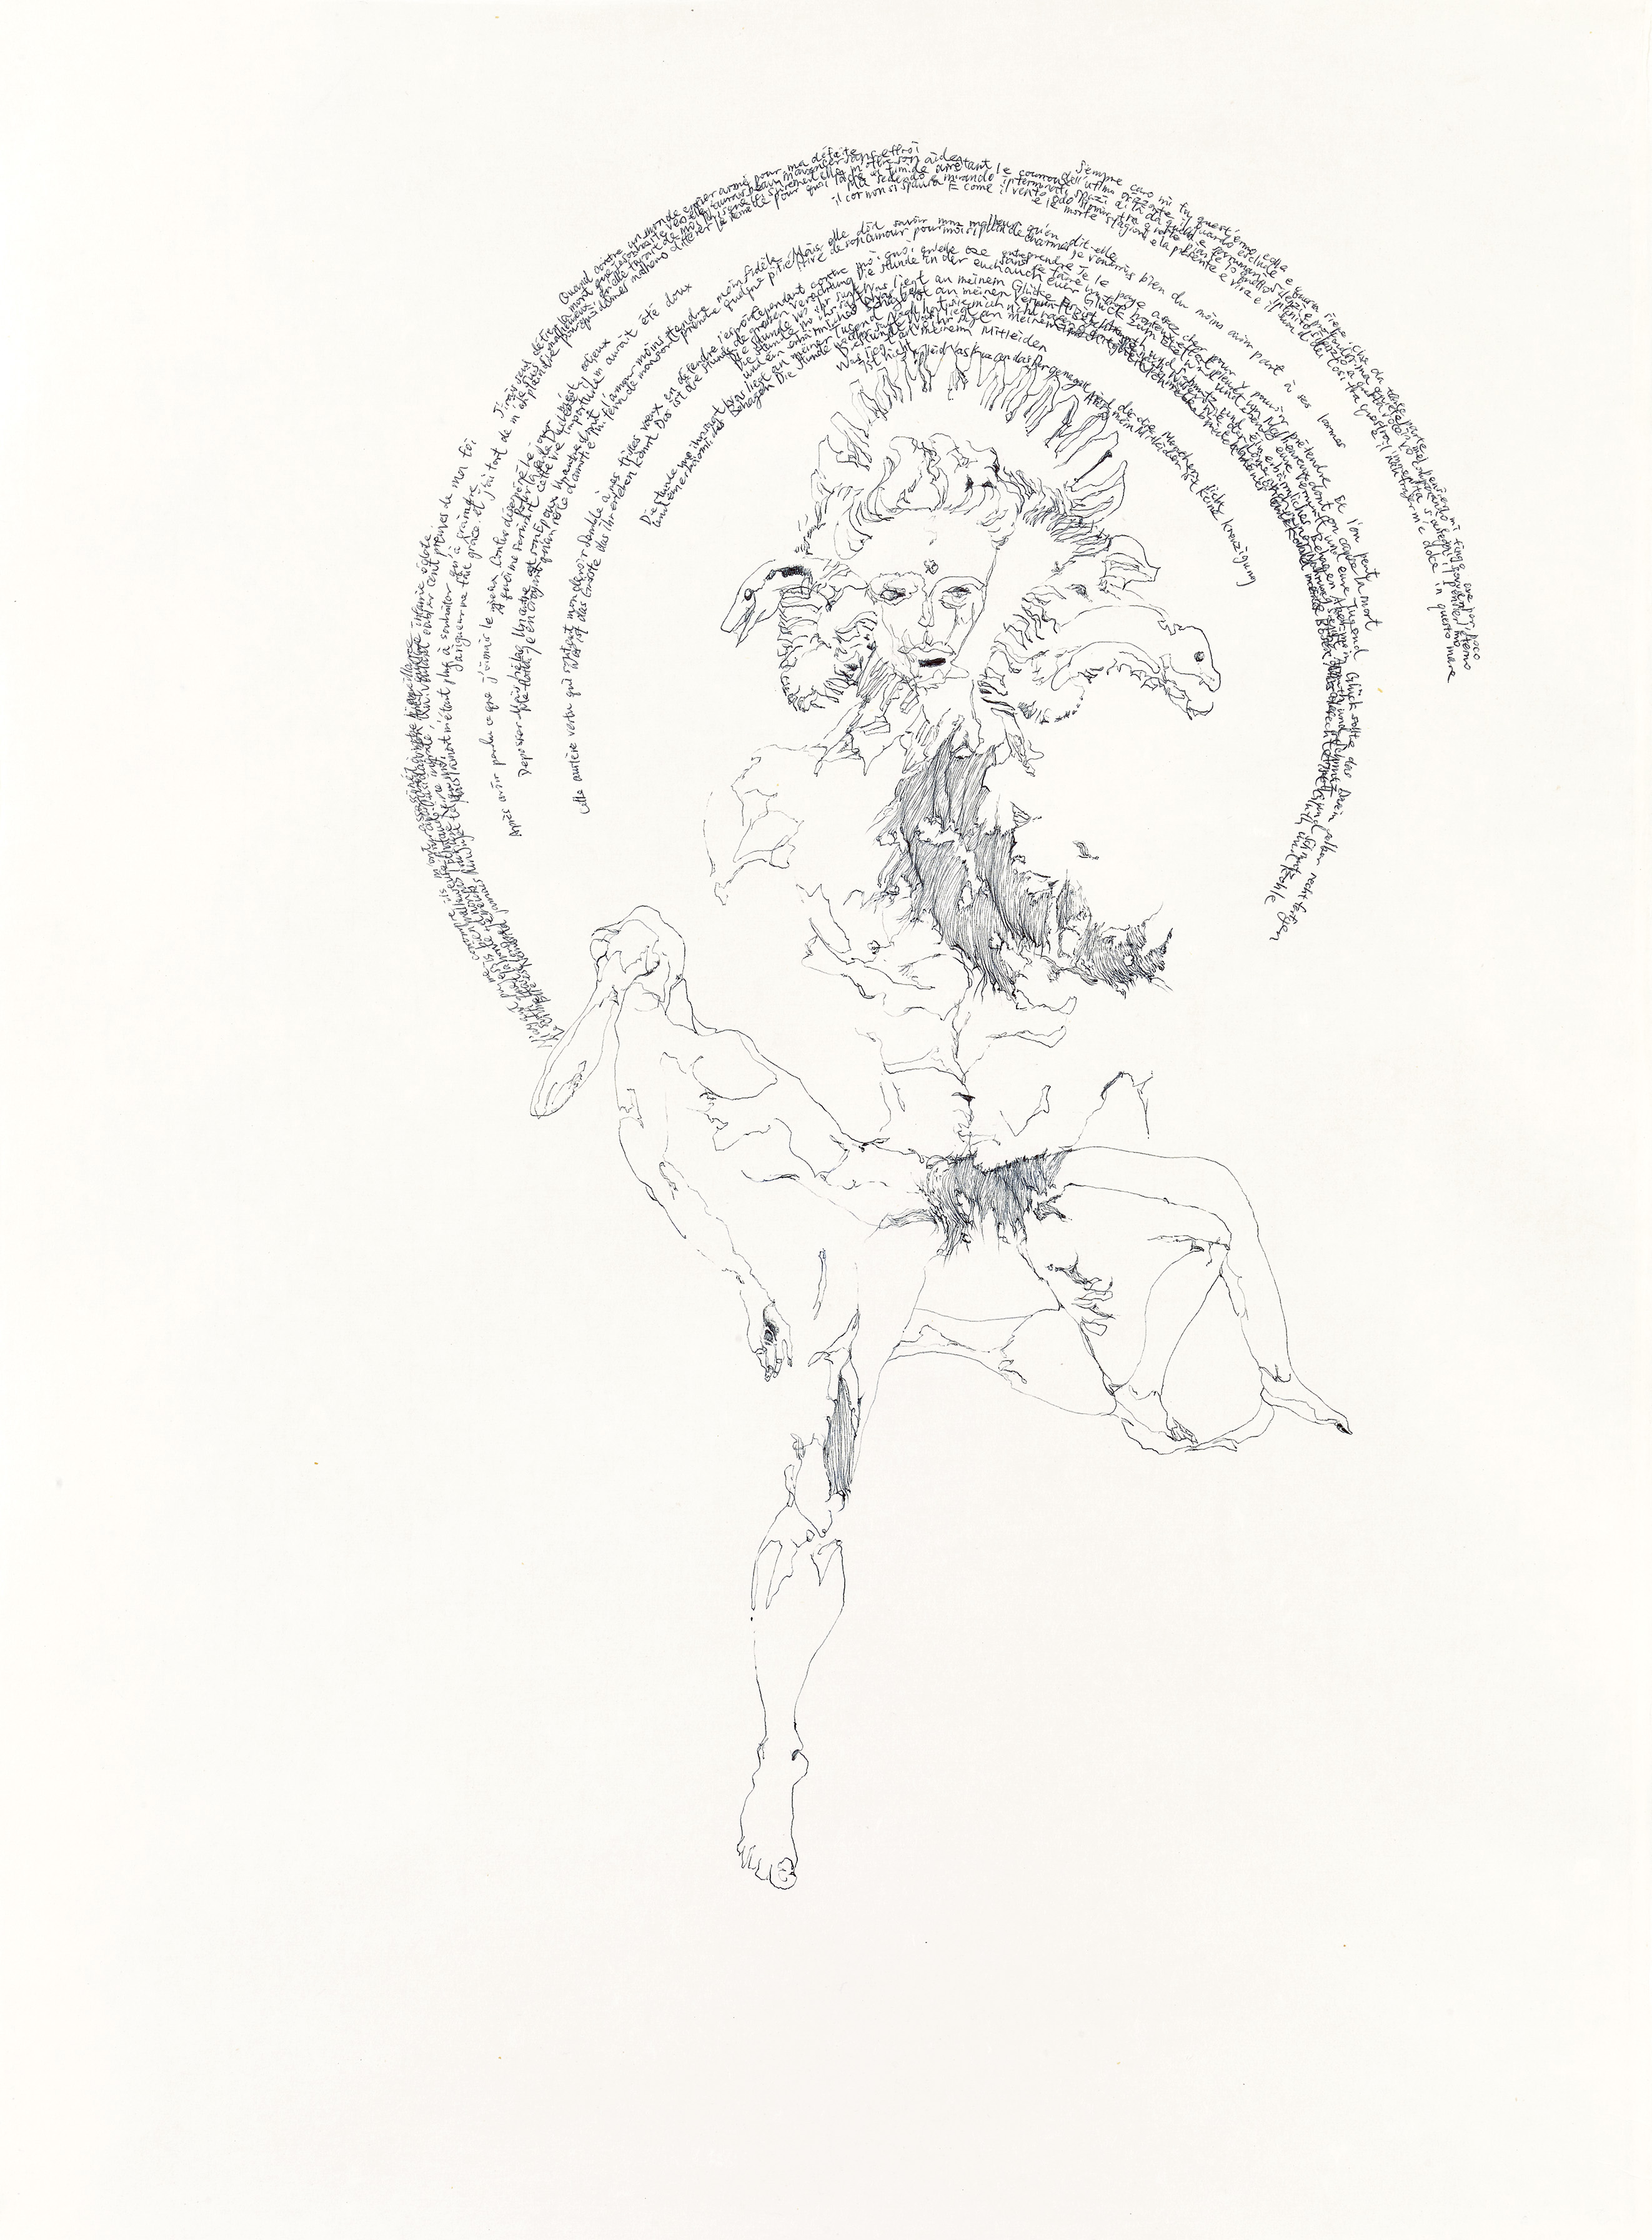 Dauntlessly - Enigma of Chimera Buddha 1, ball pen on paper, 73cm (height) x 52.5cm (width), 2015